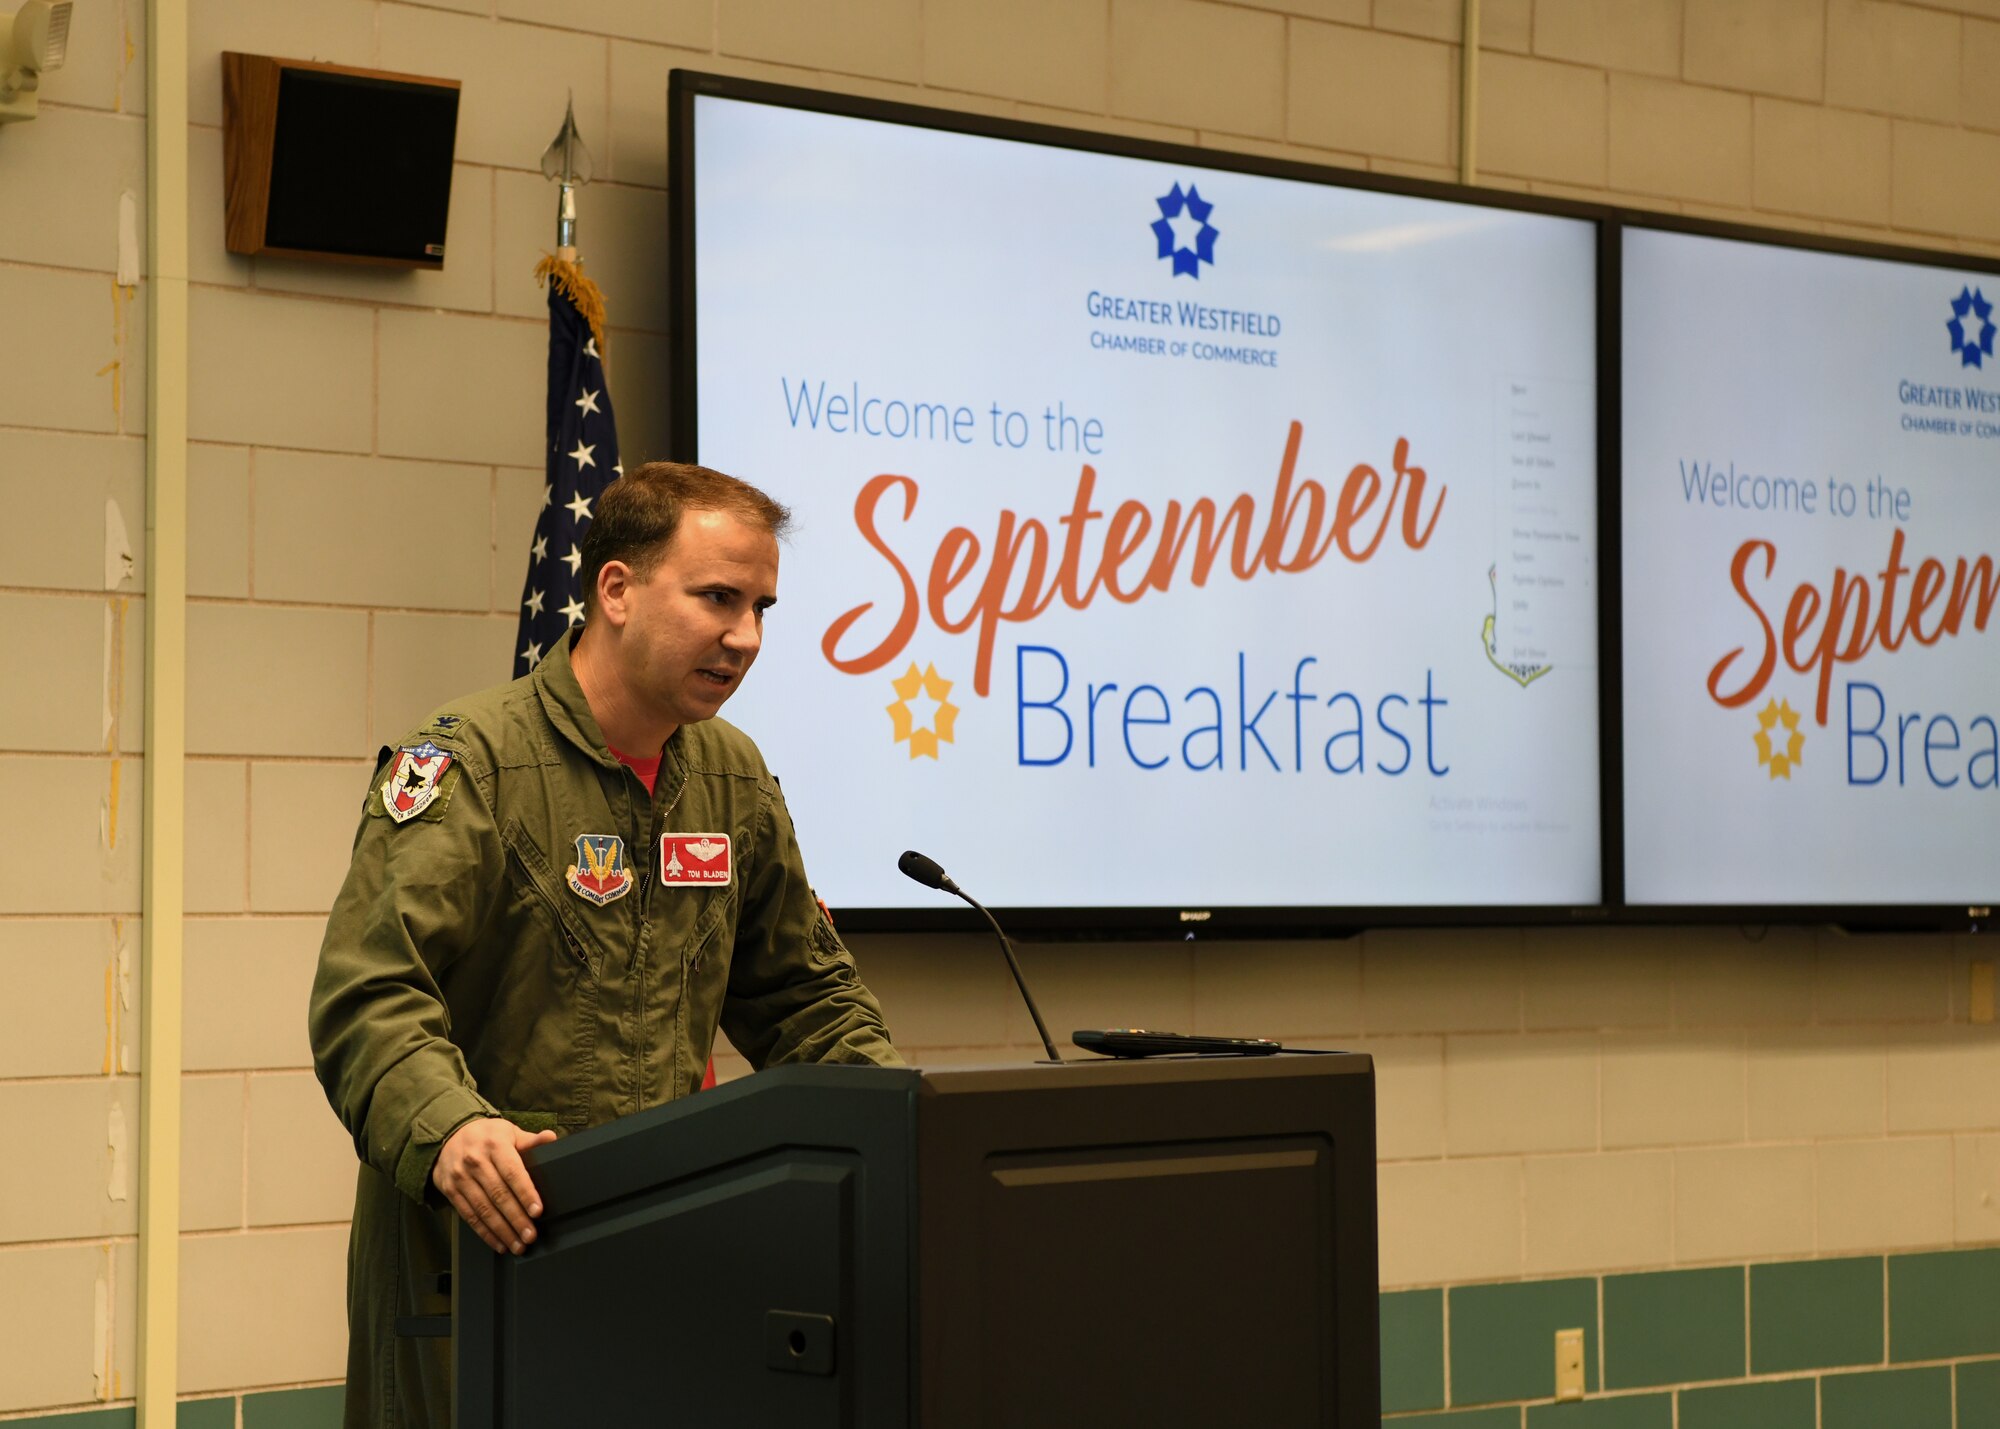 The 104th Fighter Wing hosts the September Breakfast for the Greater Westfield Chamber of Commerce. The 104th Fighter Wing's Vice Commander, Colonel Tom "Sling" Bladen addressed the chamber.   (U.S. Air National Guard photo by Airman Basic Camille Lienau)